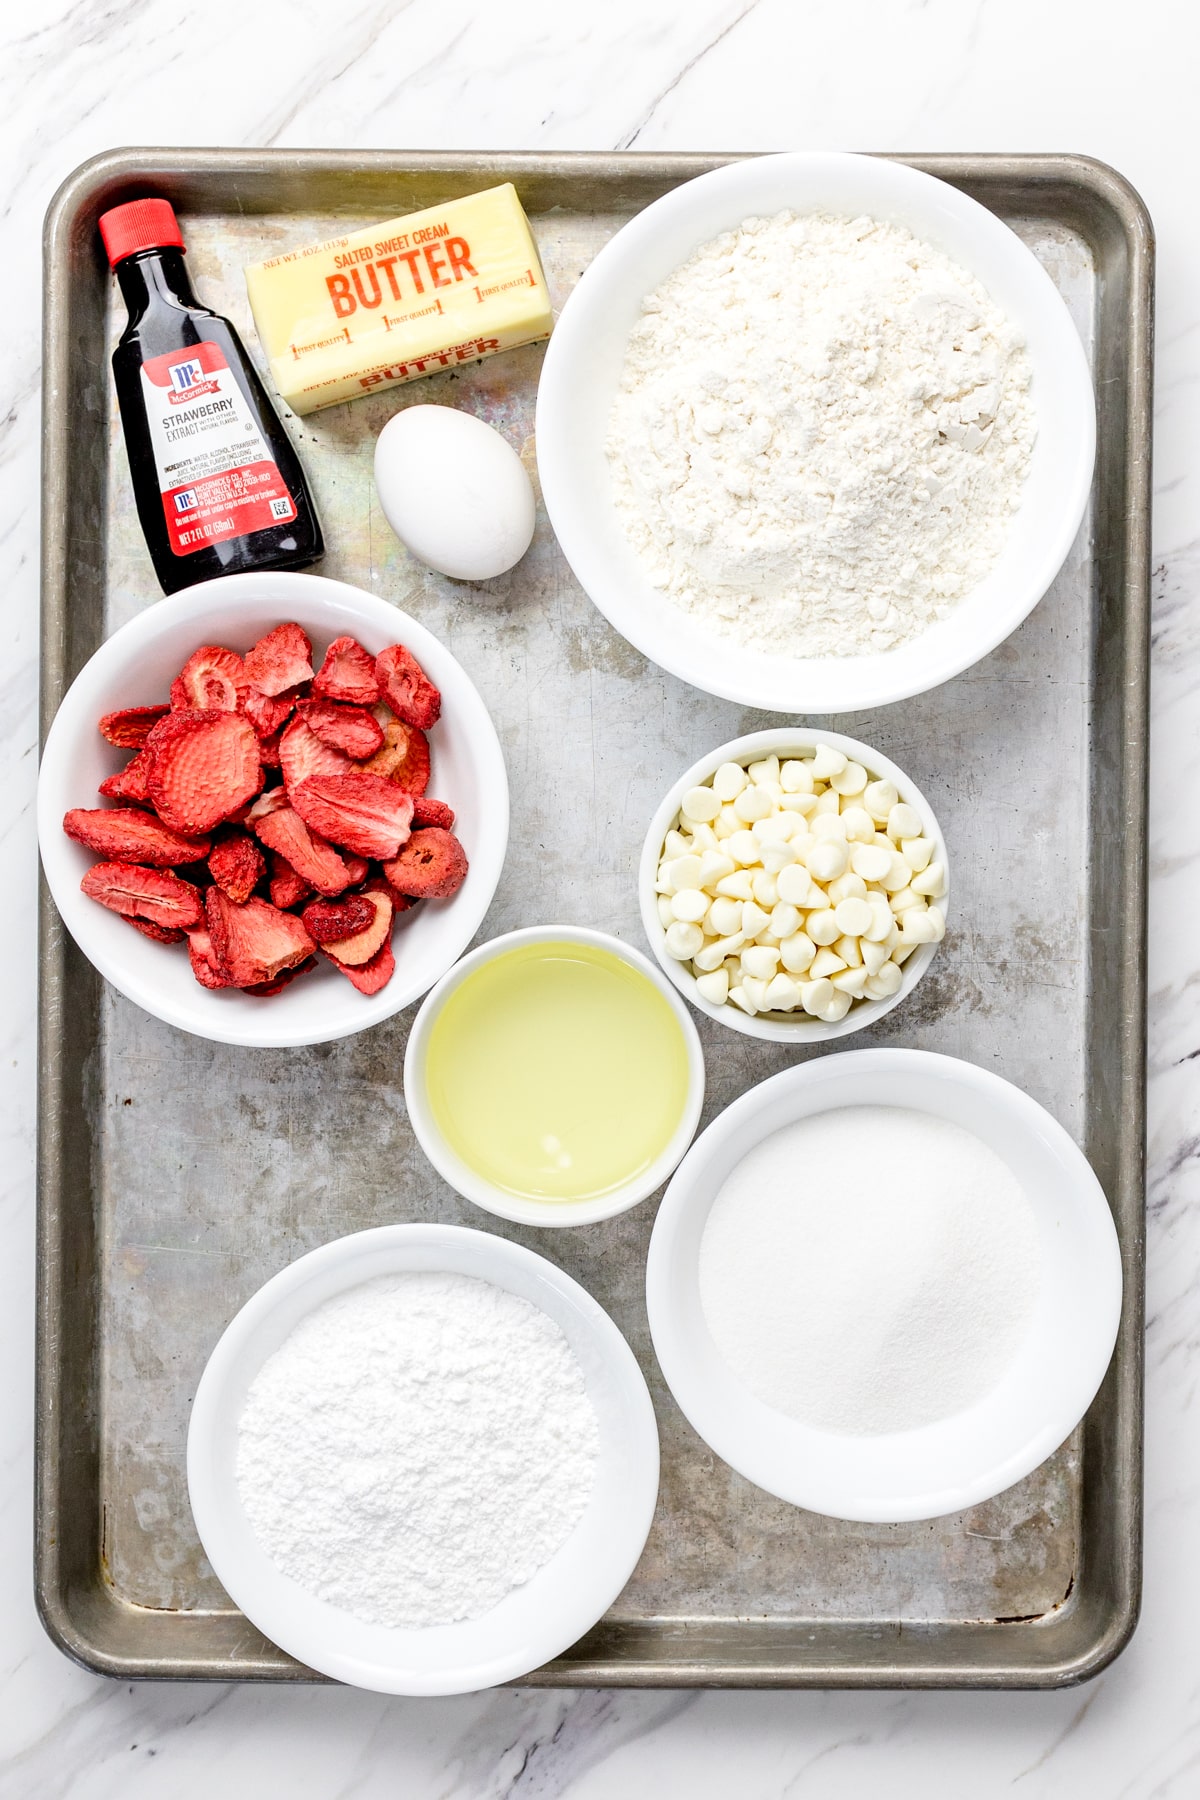 Top view of ingredients needed to make Strawberry white chocolate chip cookies in bowls on a baking tray.